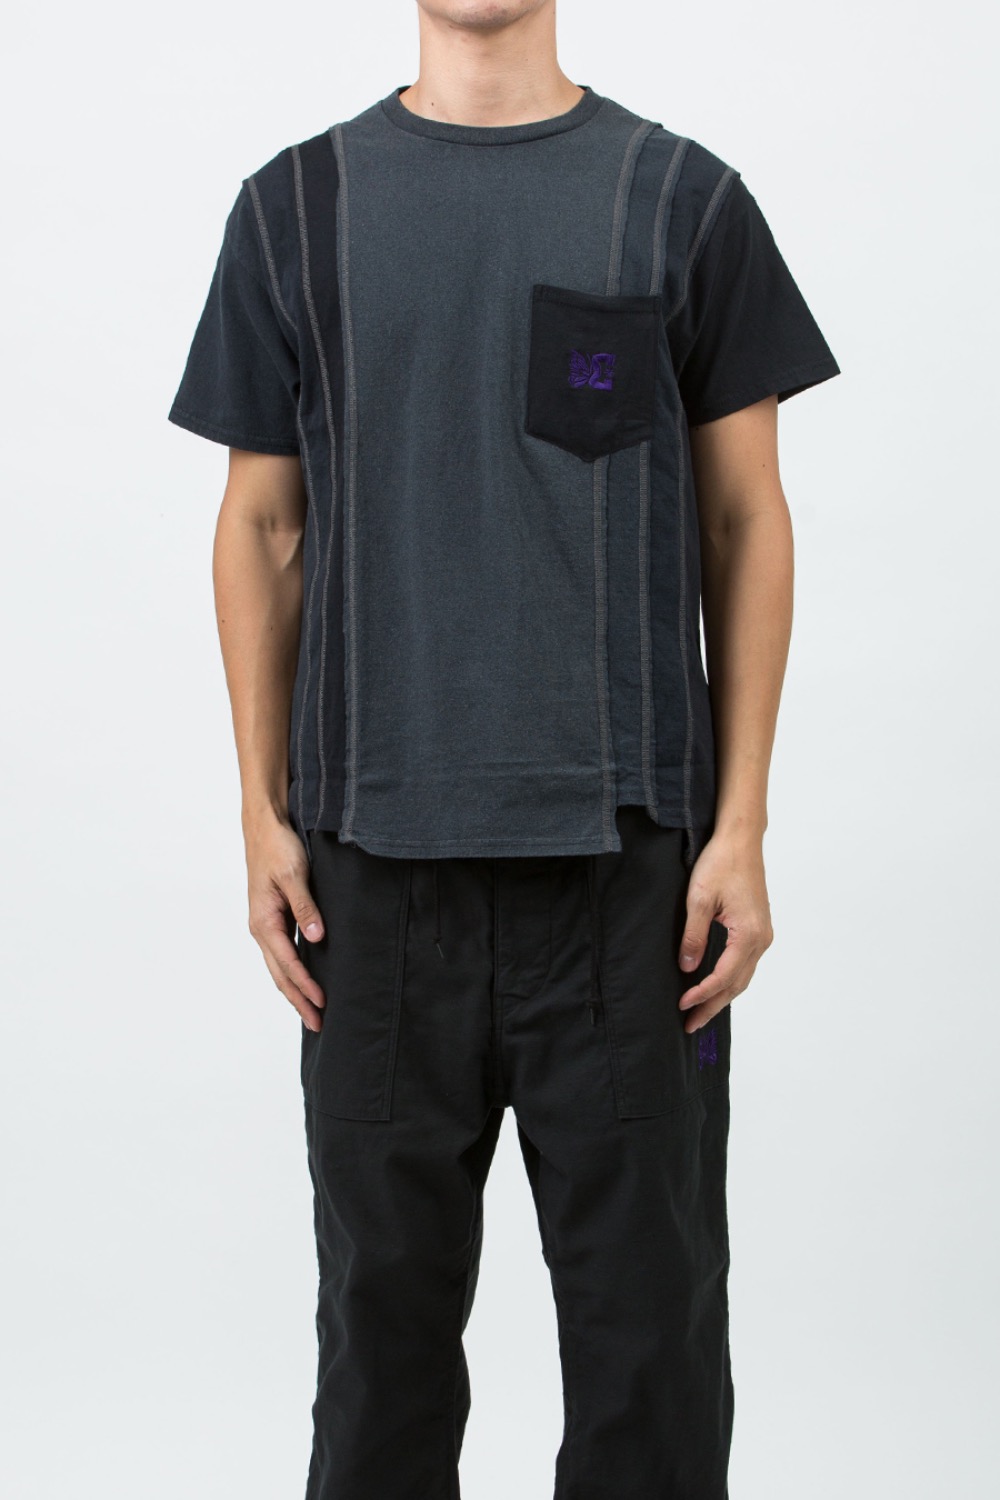 (23FW)NEEDLES X DC SHOES 7 CUTS S/S TEE - SOLID / FADE BLACK